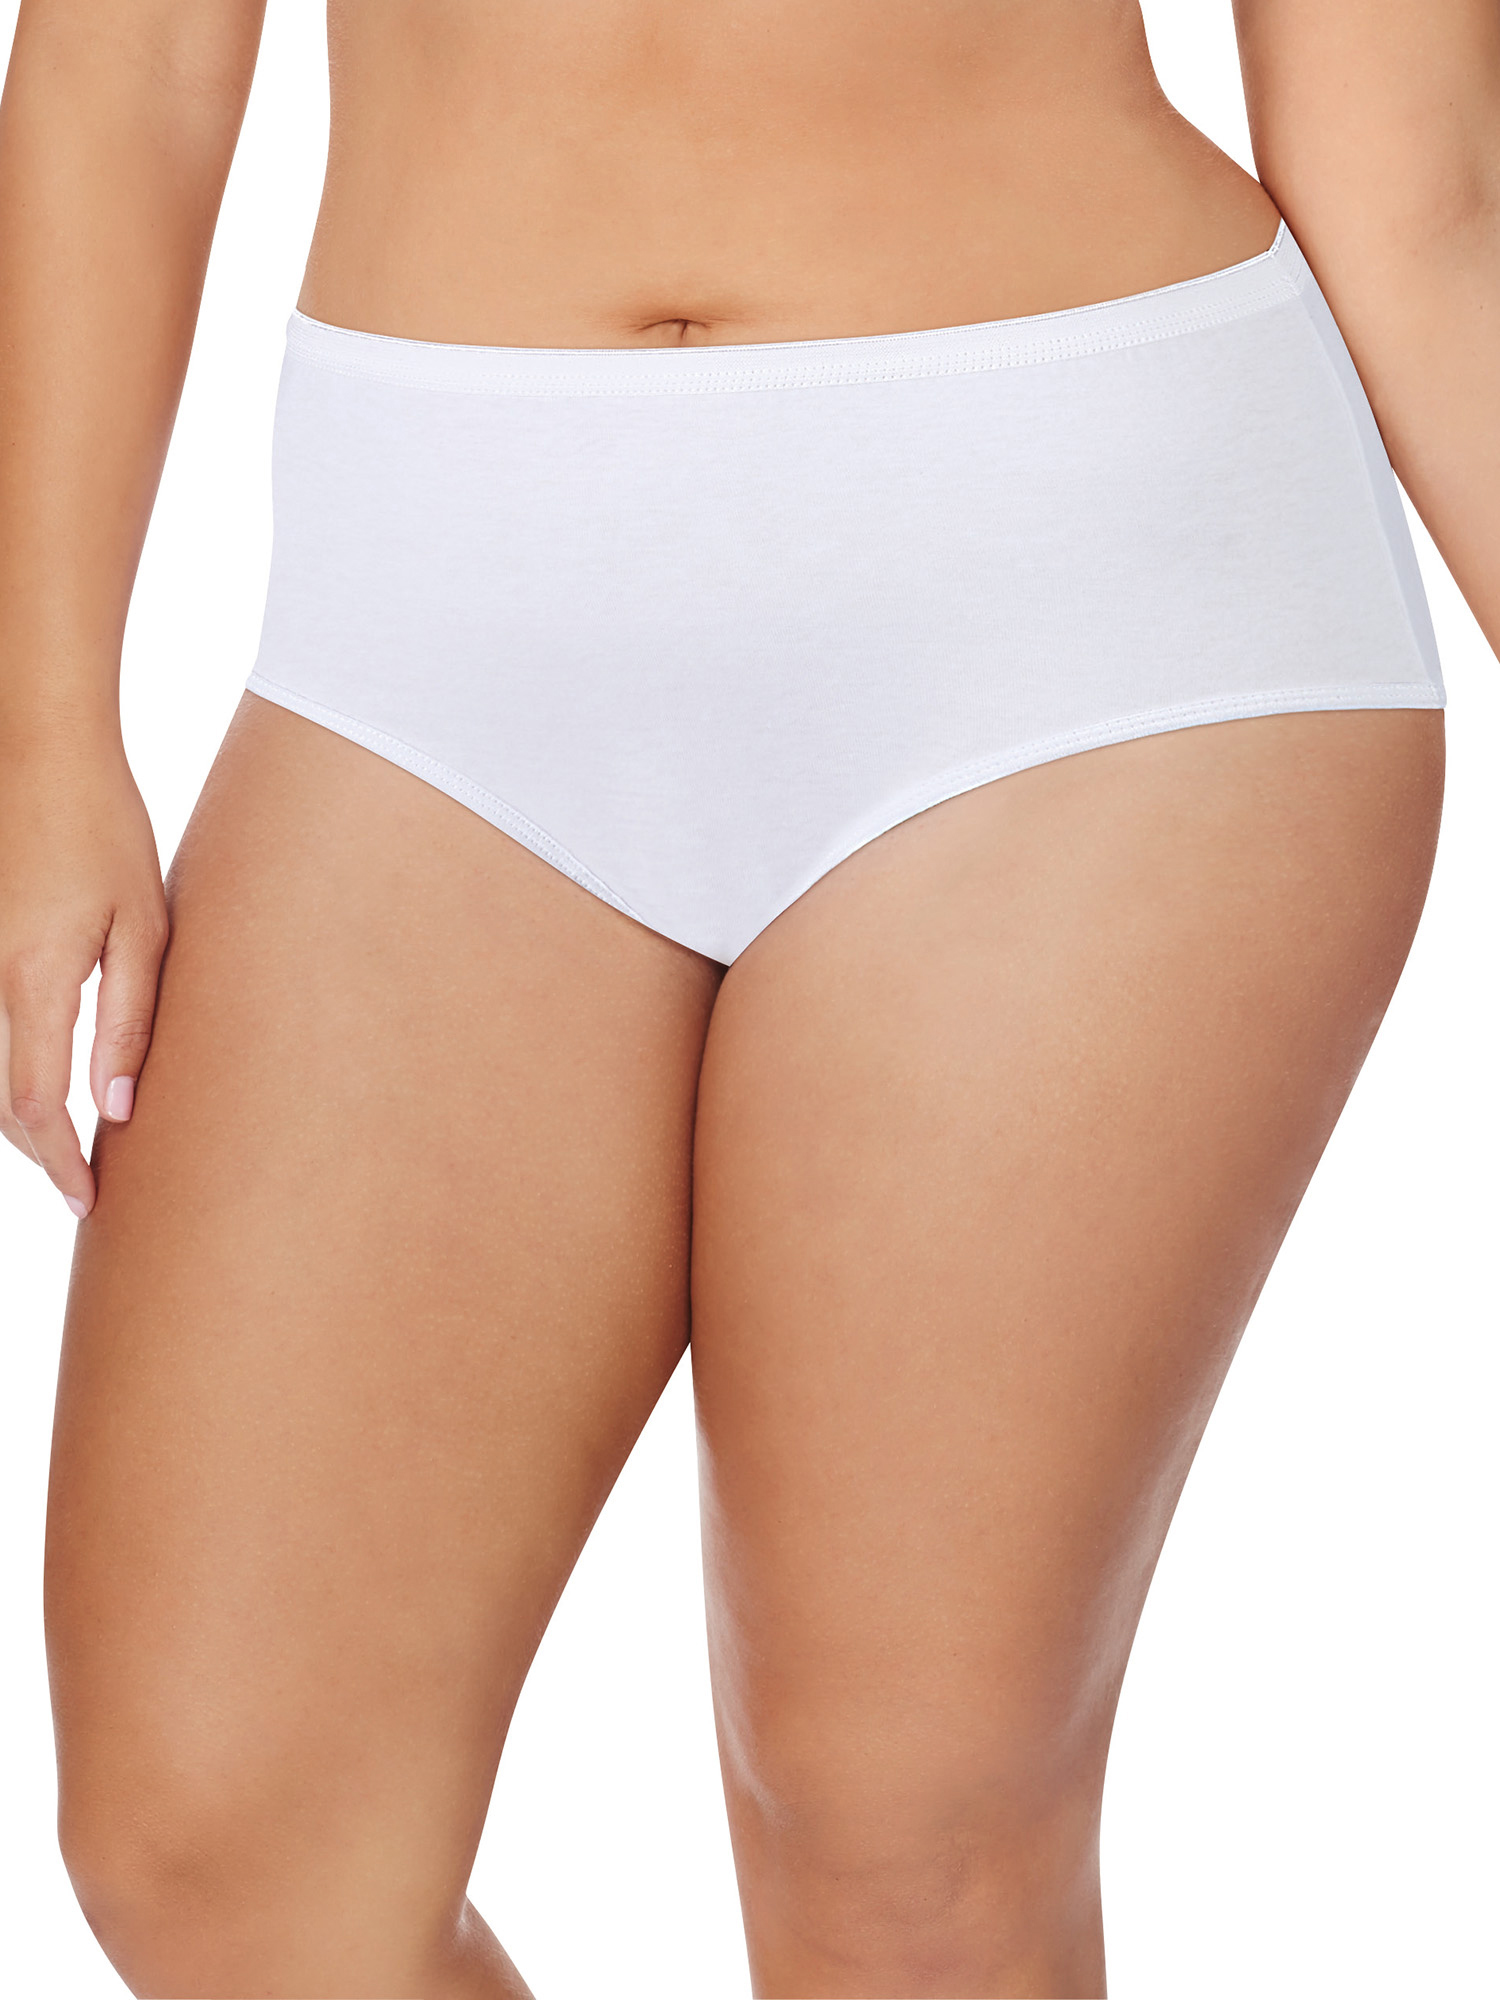 Just My Size Women's Plus Tagless White Cotton Briefs 5-Pack - image 1 of 4